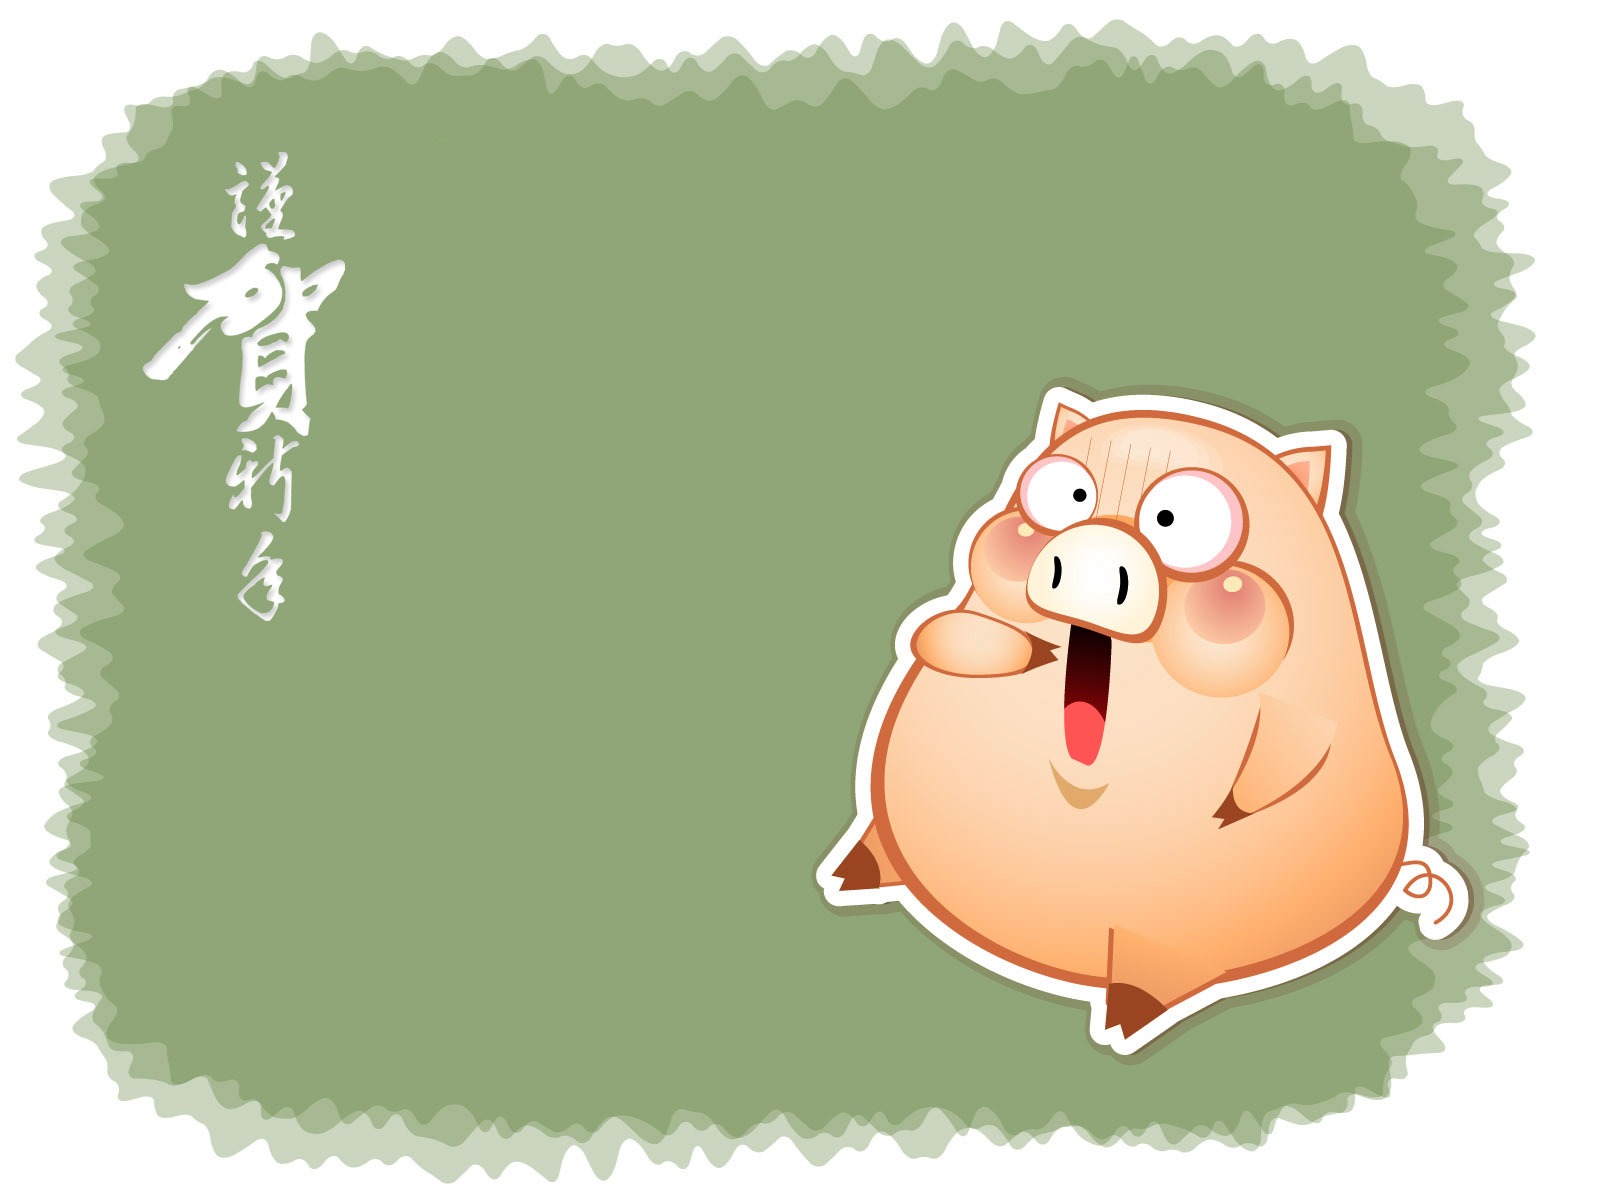 Year of the Pig Theme Wallpaper #12 - 1600x1200